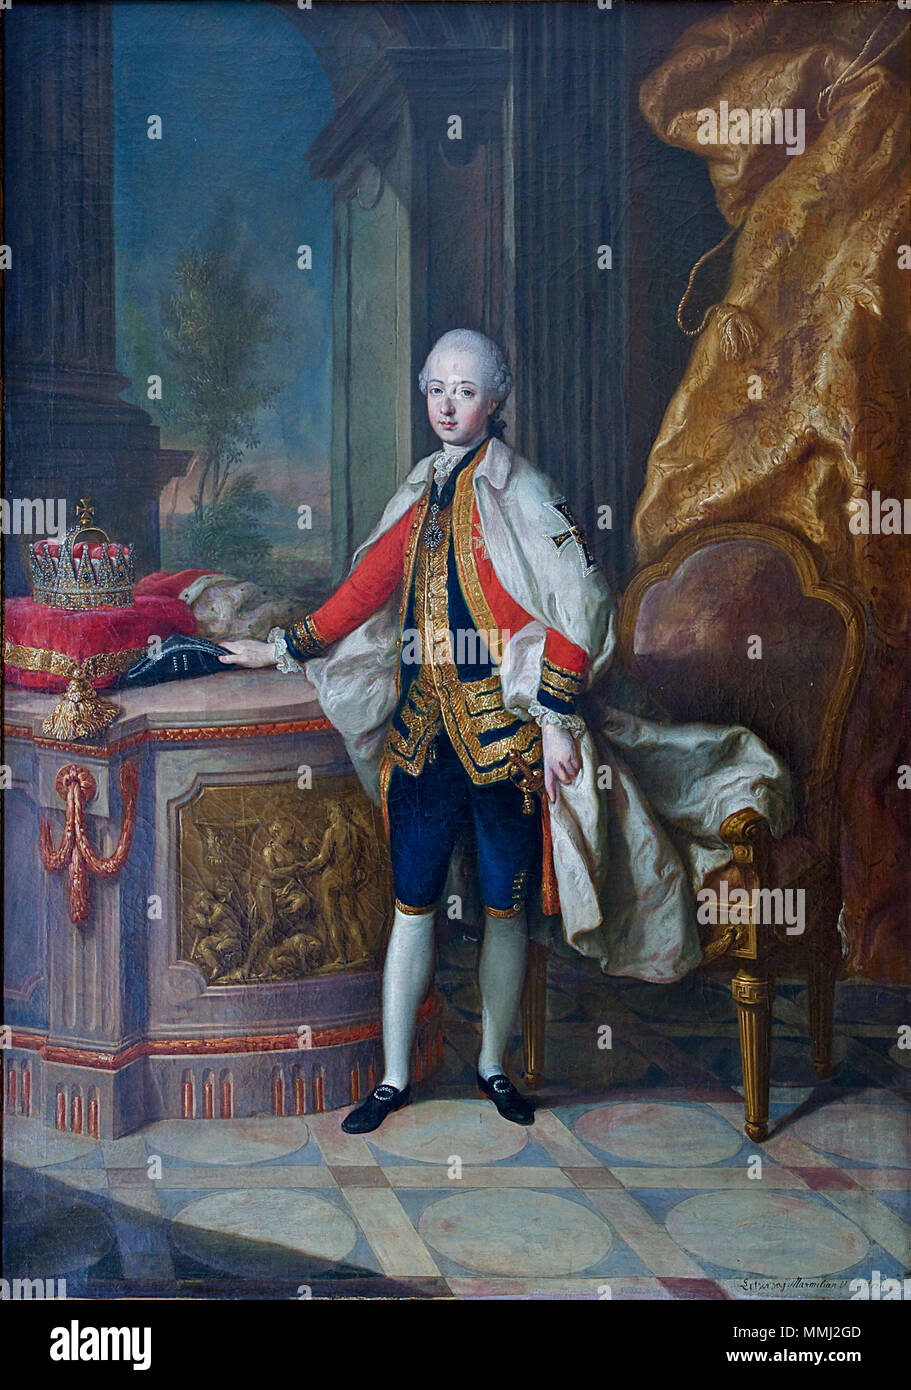 . Portrait of Maximilian Francis of Habsburg-Lorraine, Archduke of Austria (1756-1802). Last brother of Emperors Joseph II & Leopold II, and of Queen Marie-Antoinette of France. He's painted as Grand Master of the Teutonic Order.  Archduke Maximilian Francis of Austria. between 1780 and 1784. Erzherzog Maximilian Franz of Austria Stock Photo